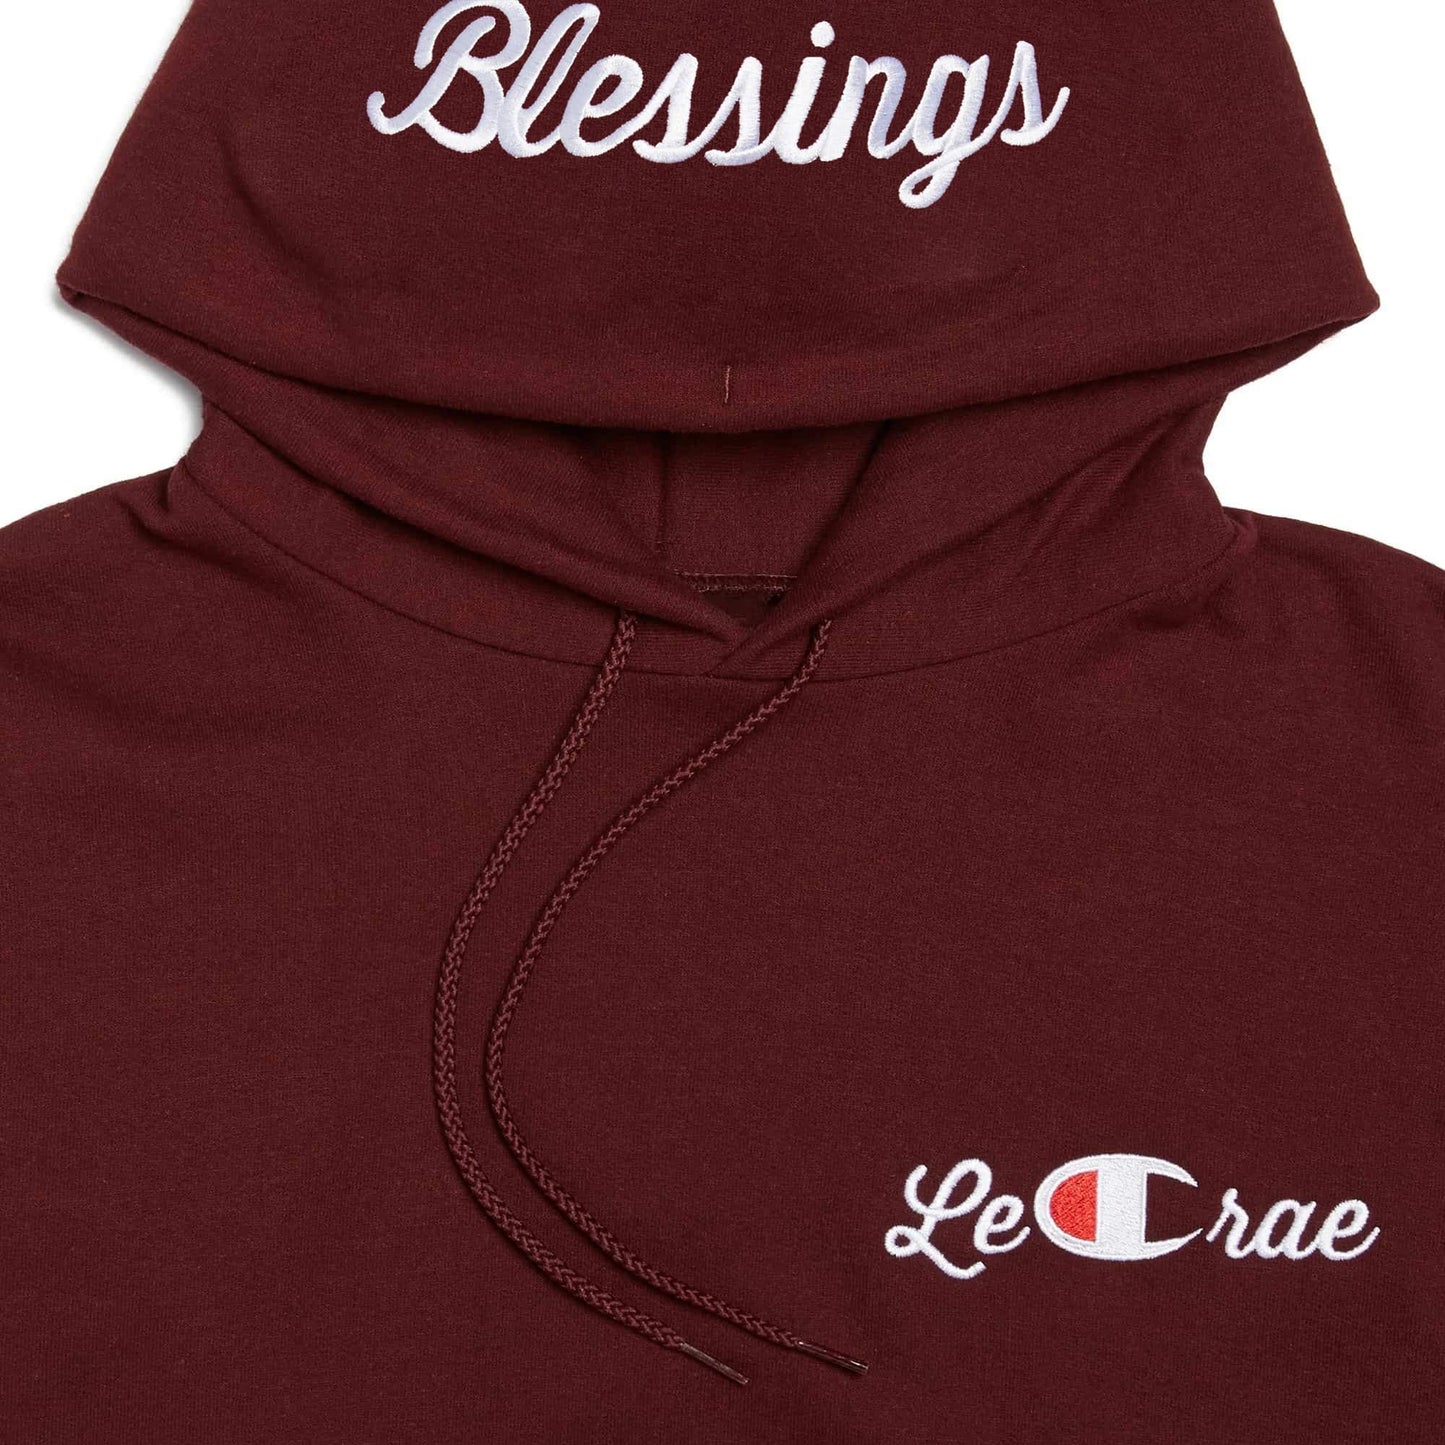 Blessings champion maroon hoodie front up close Lecrae